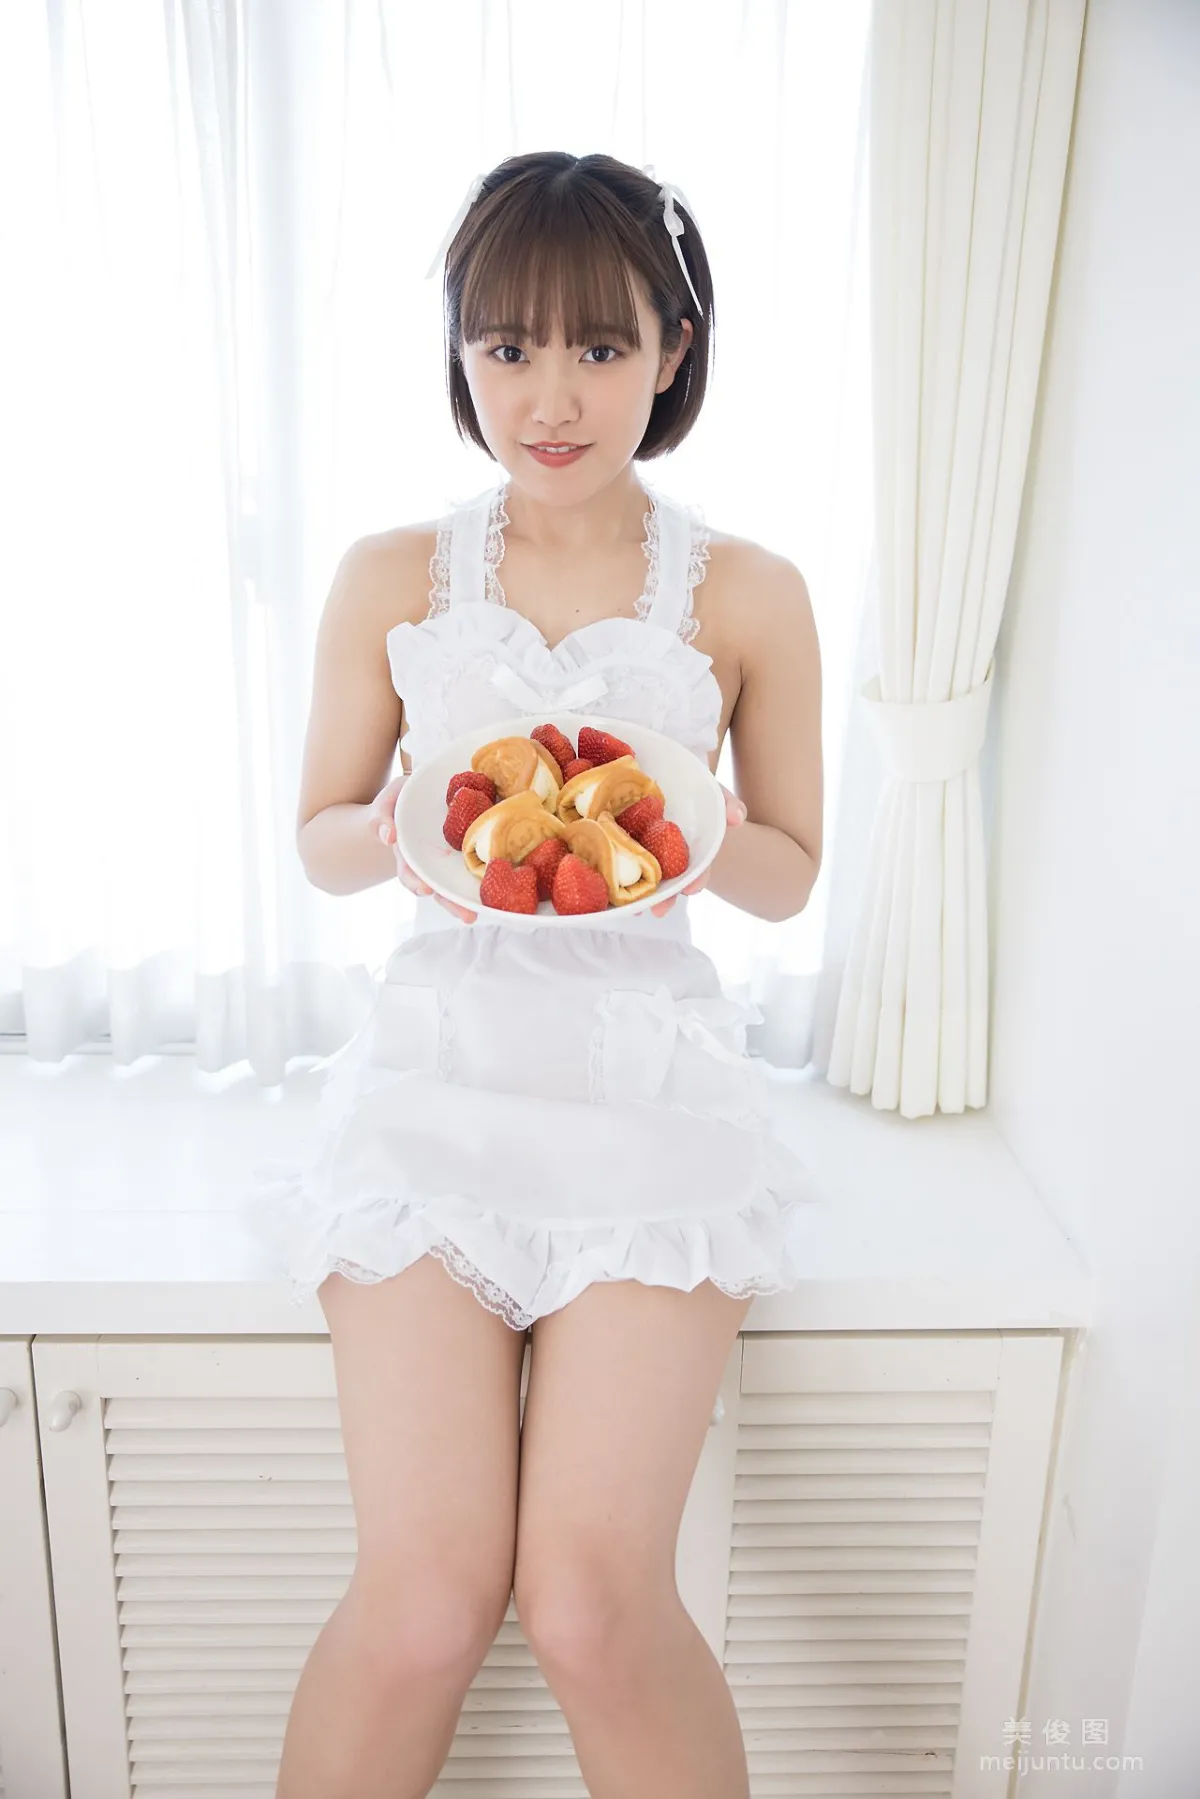 [Minisuka.tv] 香月りお - Limited Gallery 20.32